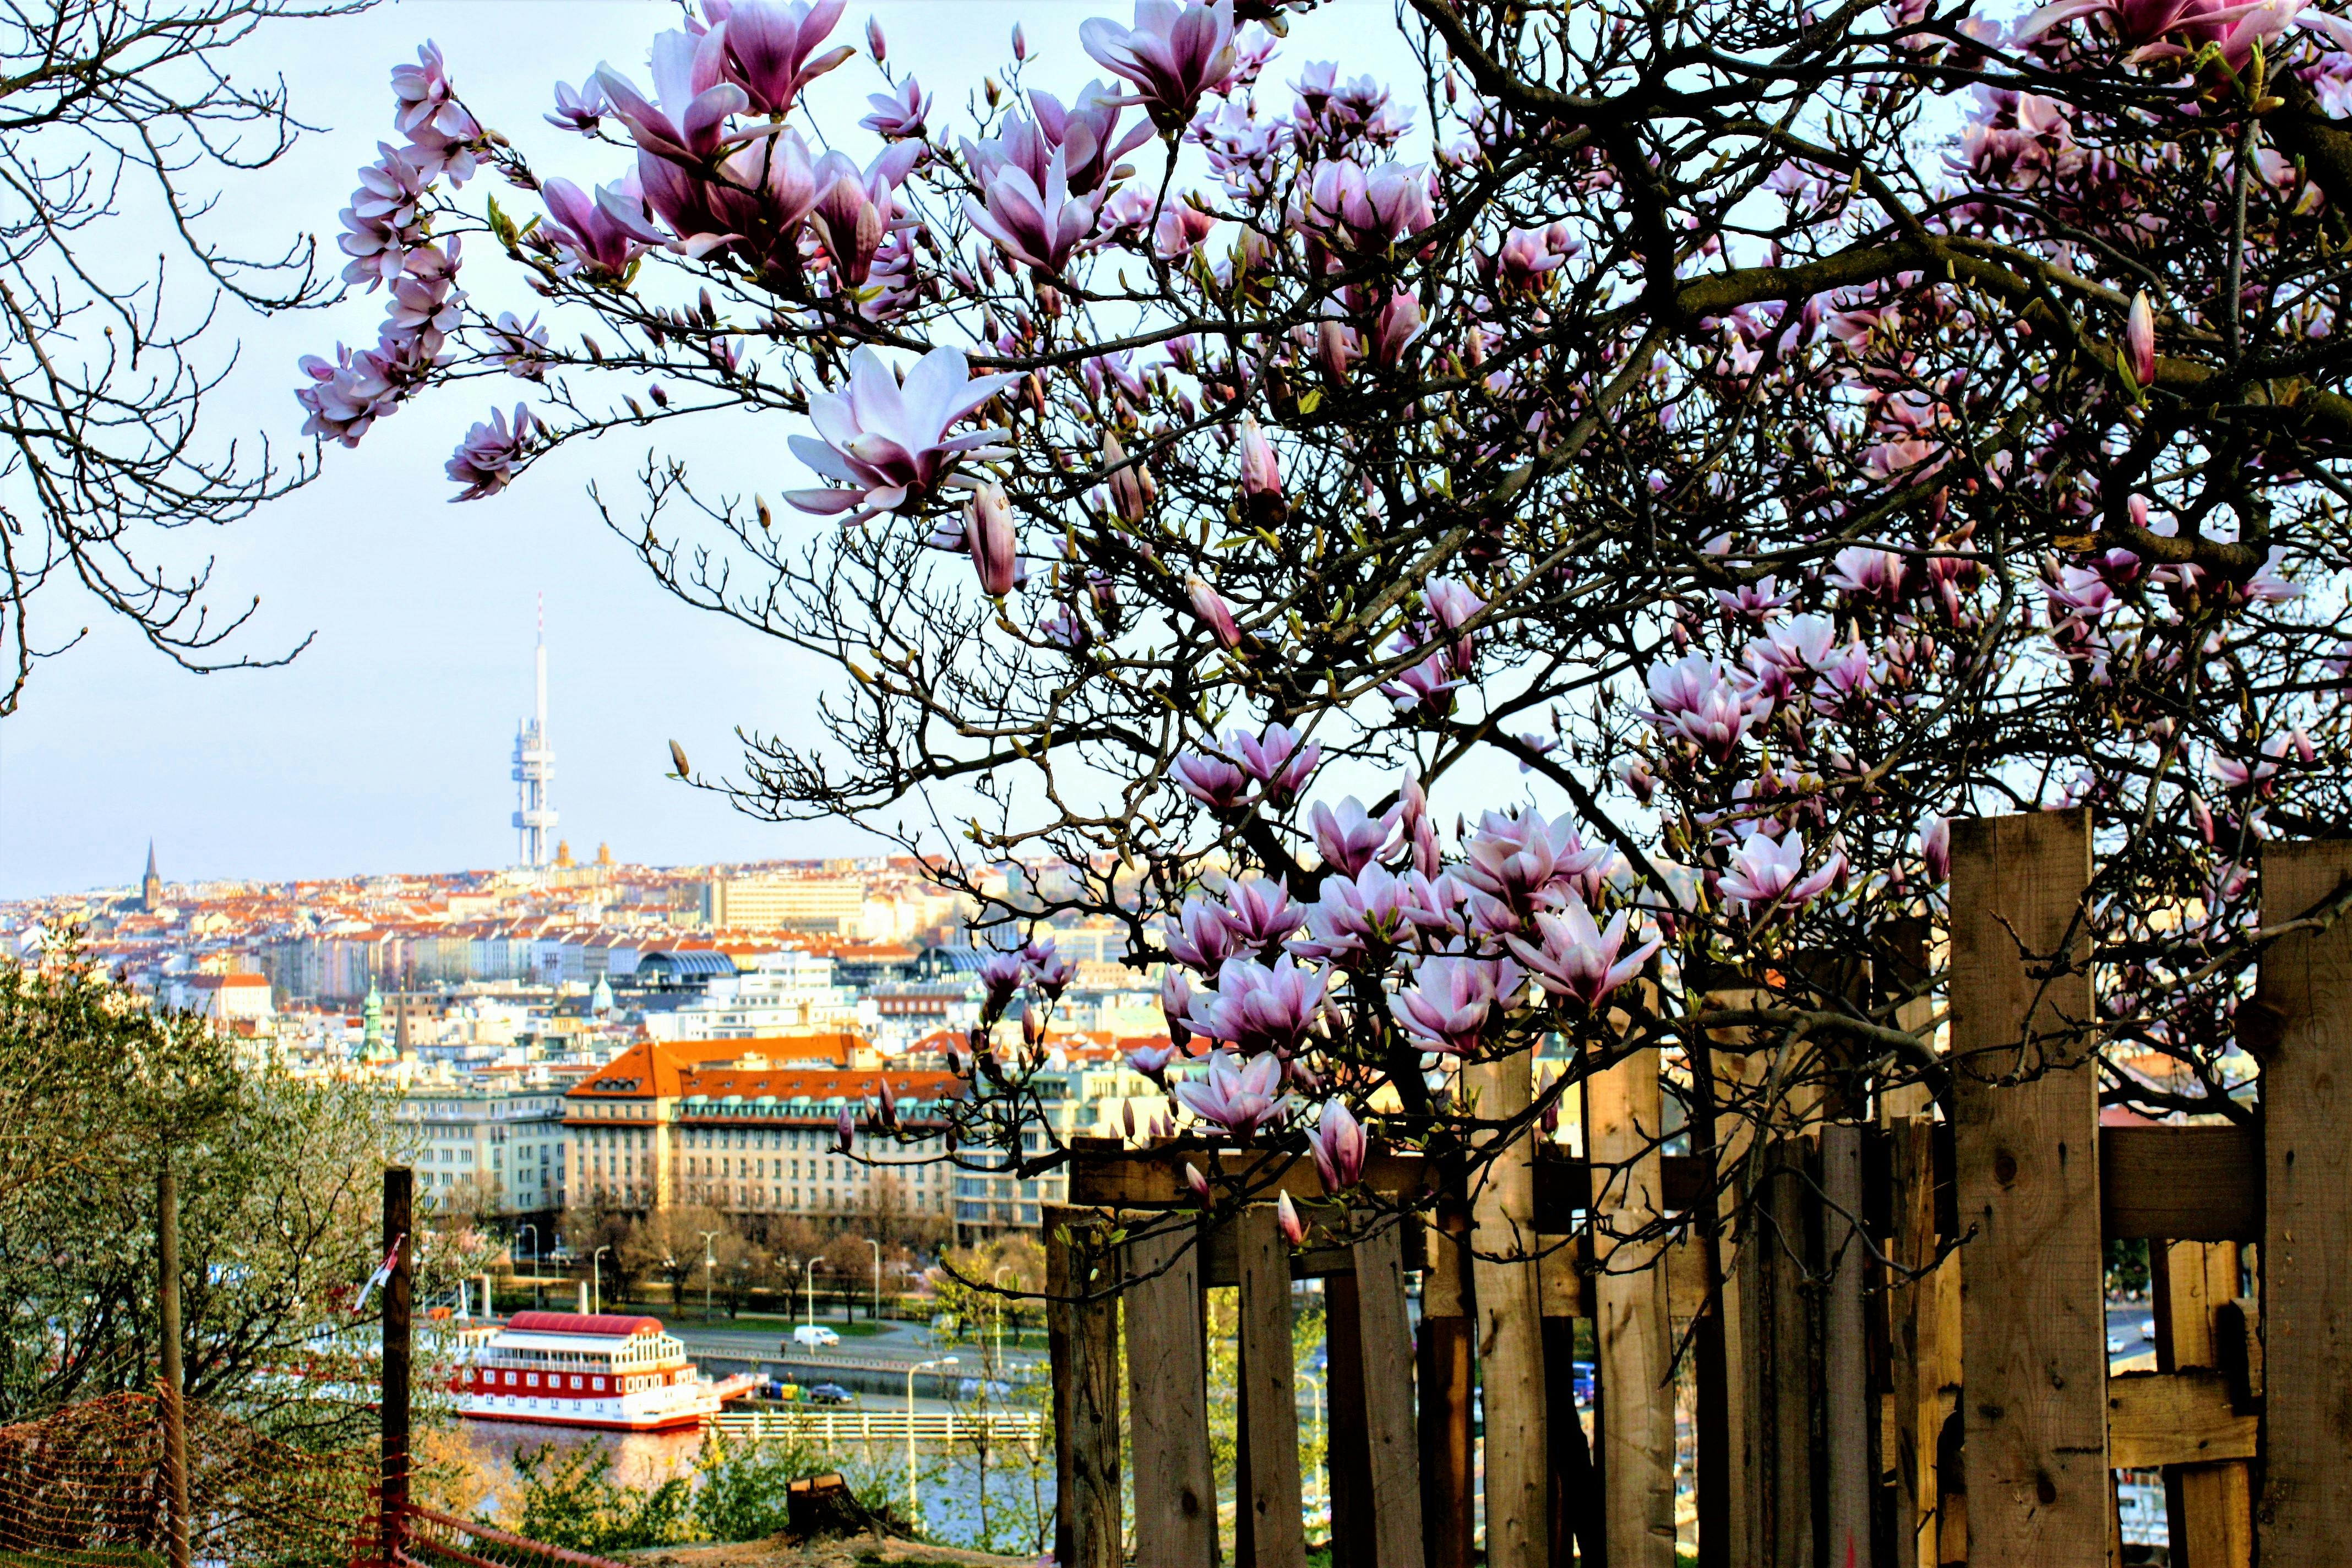 Self-guided discovery walk in Prague with breathtaking views and parks